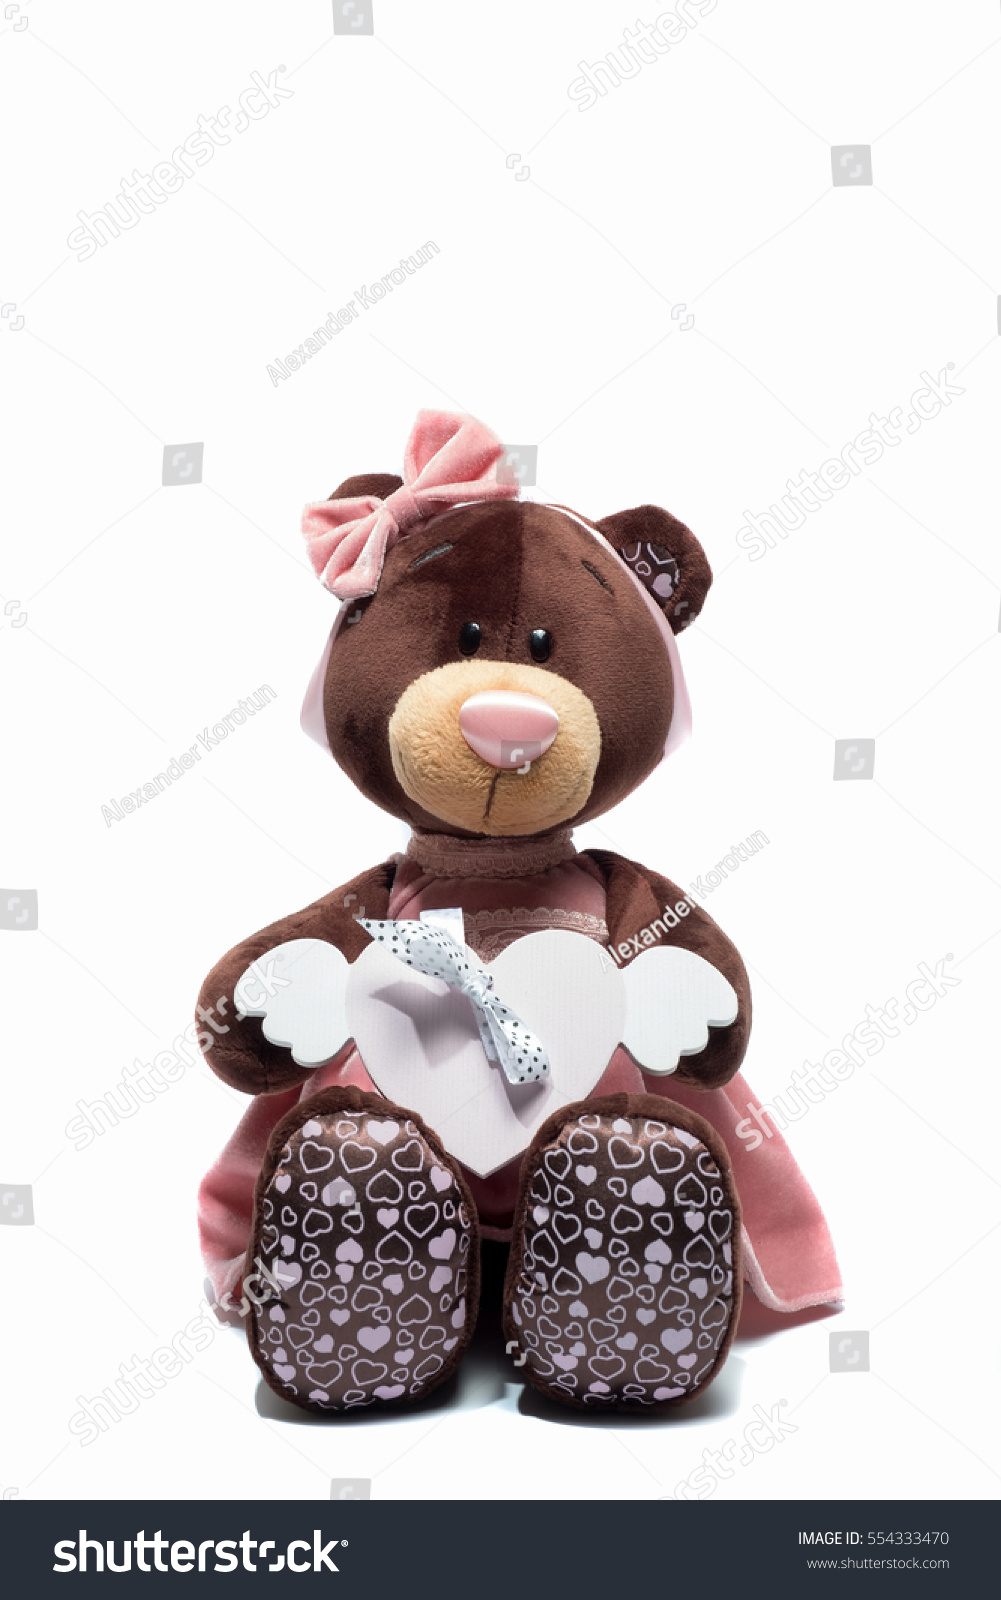 Plush toy bear sitting with heart a pink heart on isolated white background. Valentine day #554333470